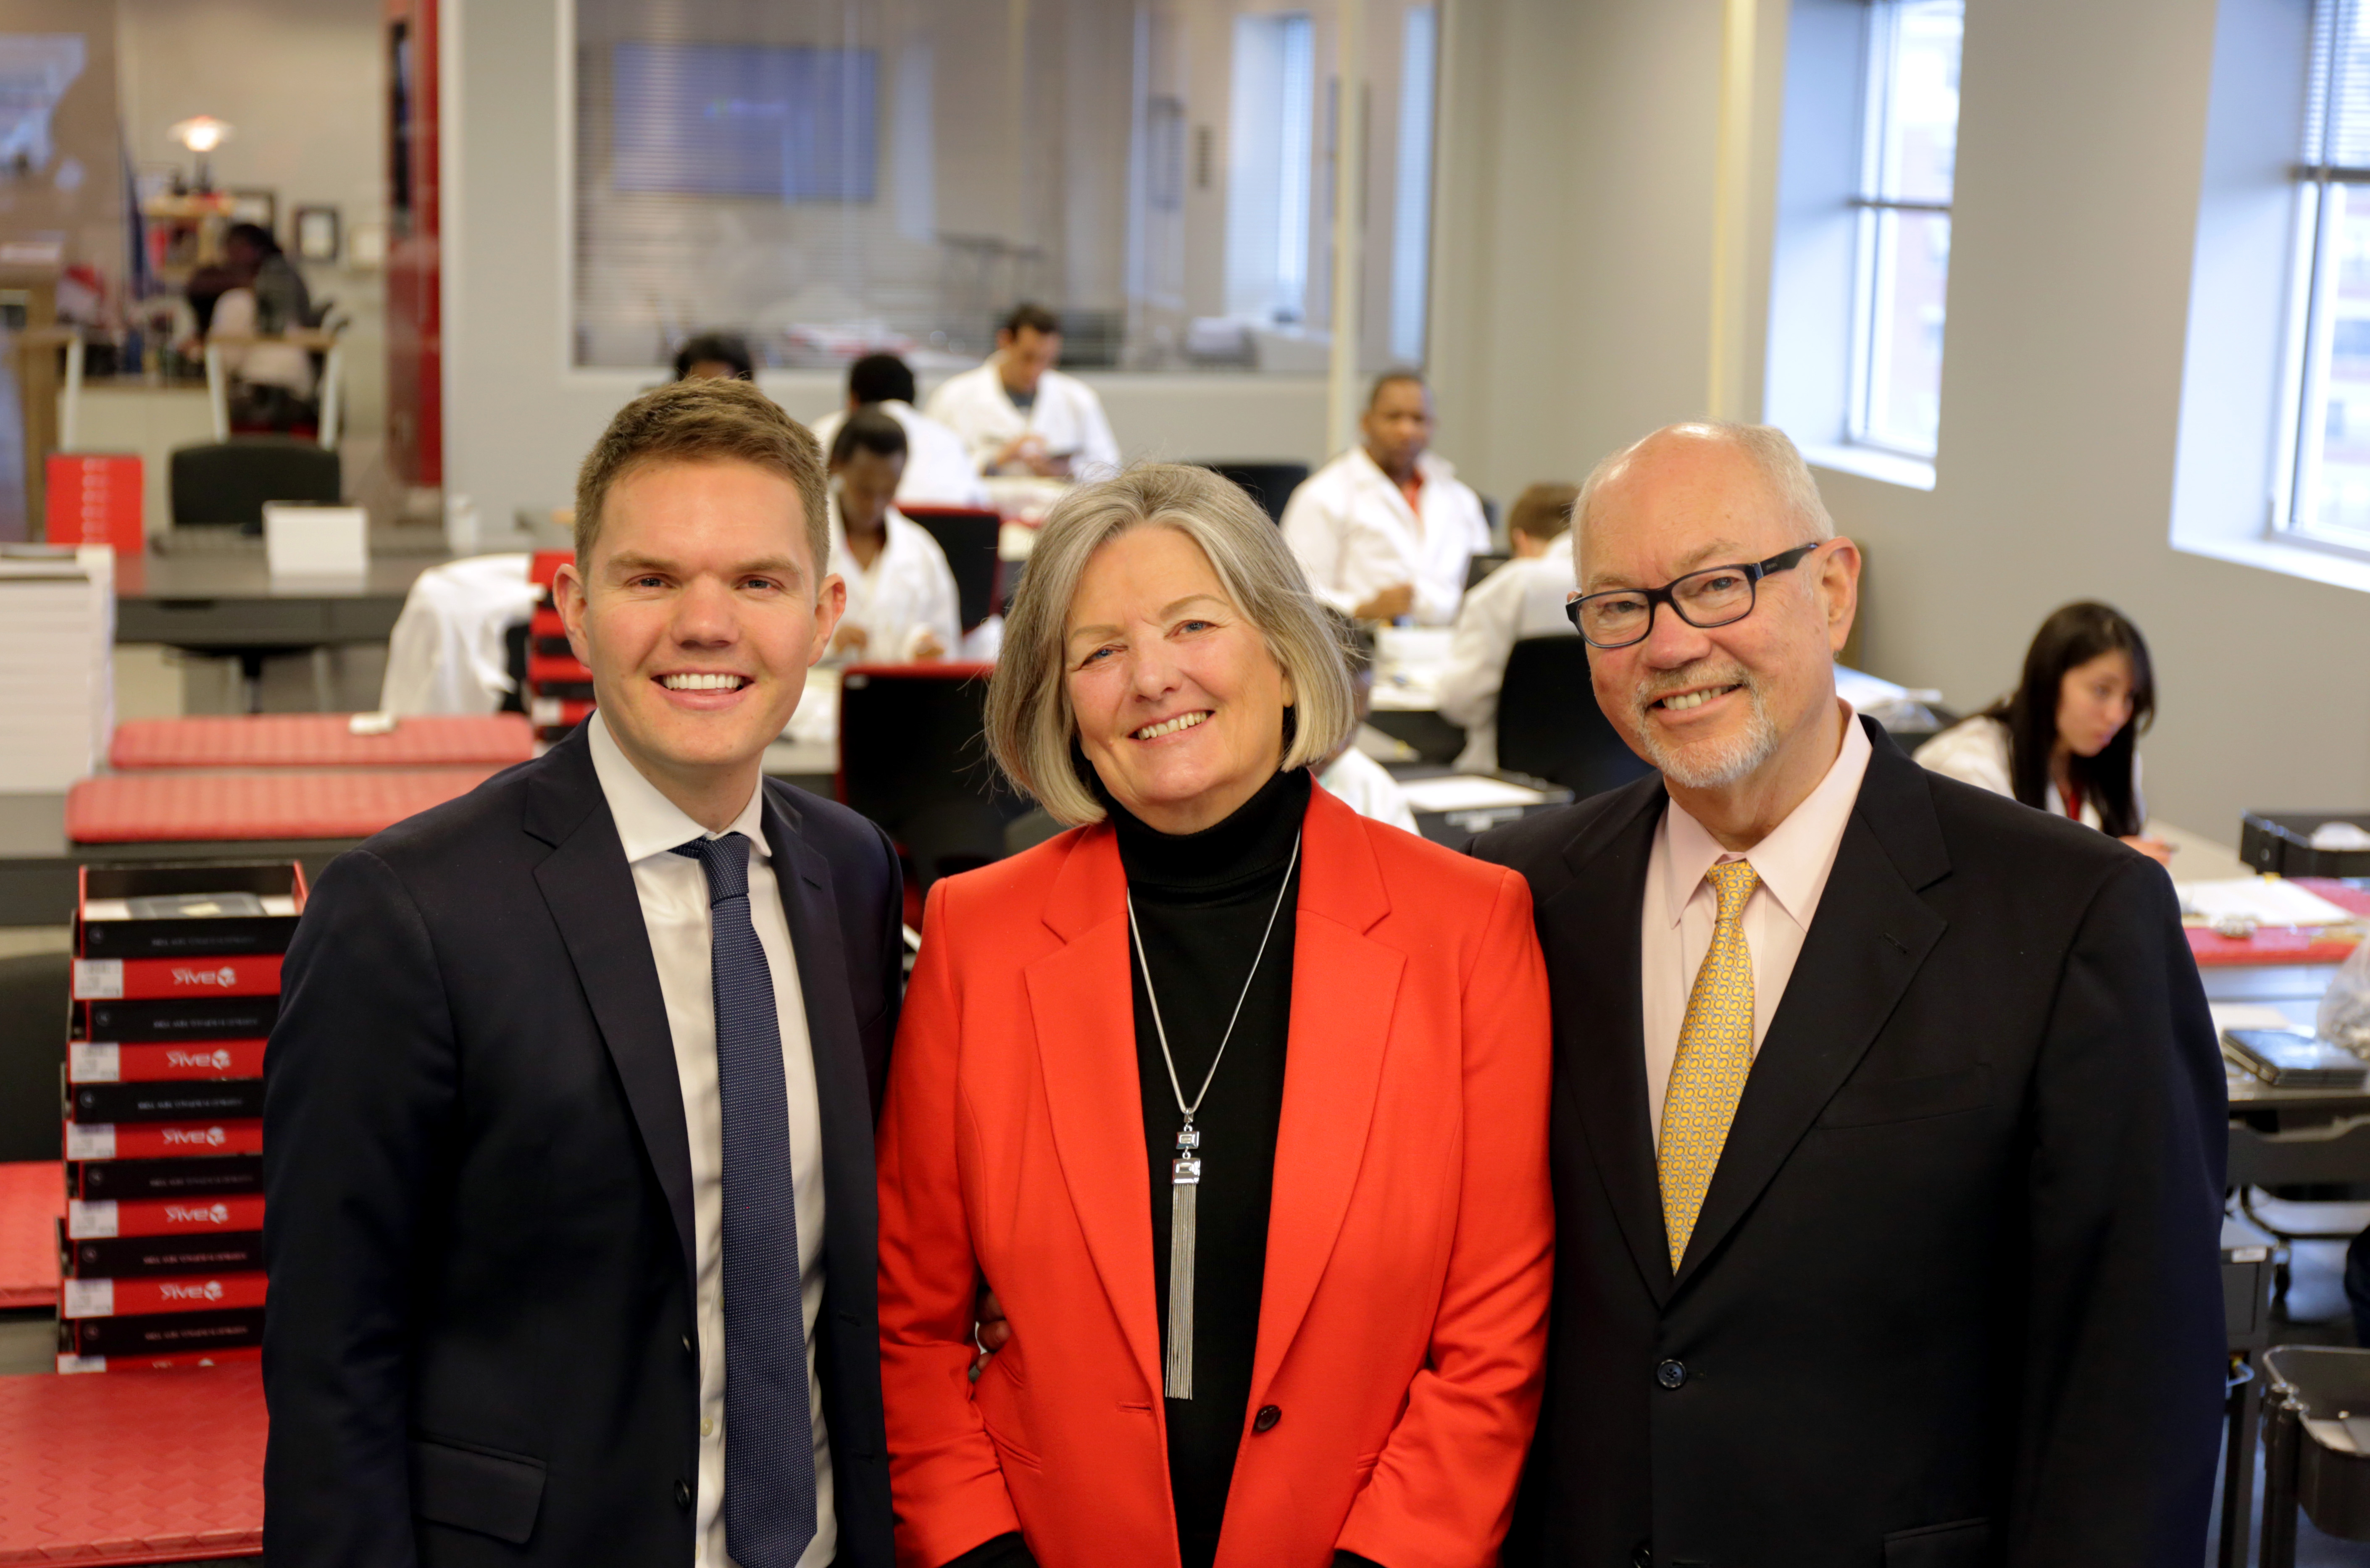 From left to right: Co-Founders Christian Bak, Ulla Bak, and JP Bak in the clean room at BAK USA.